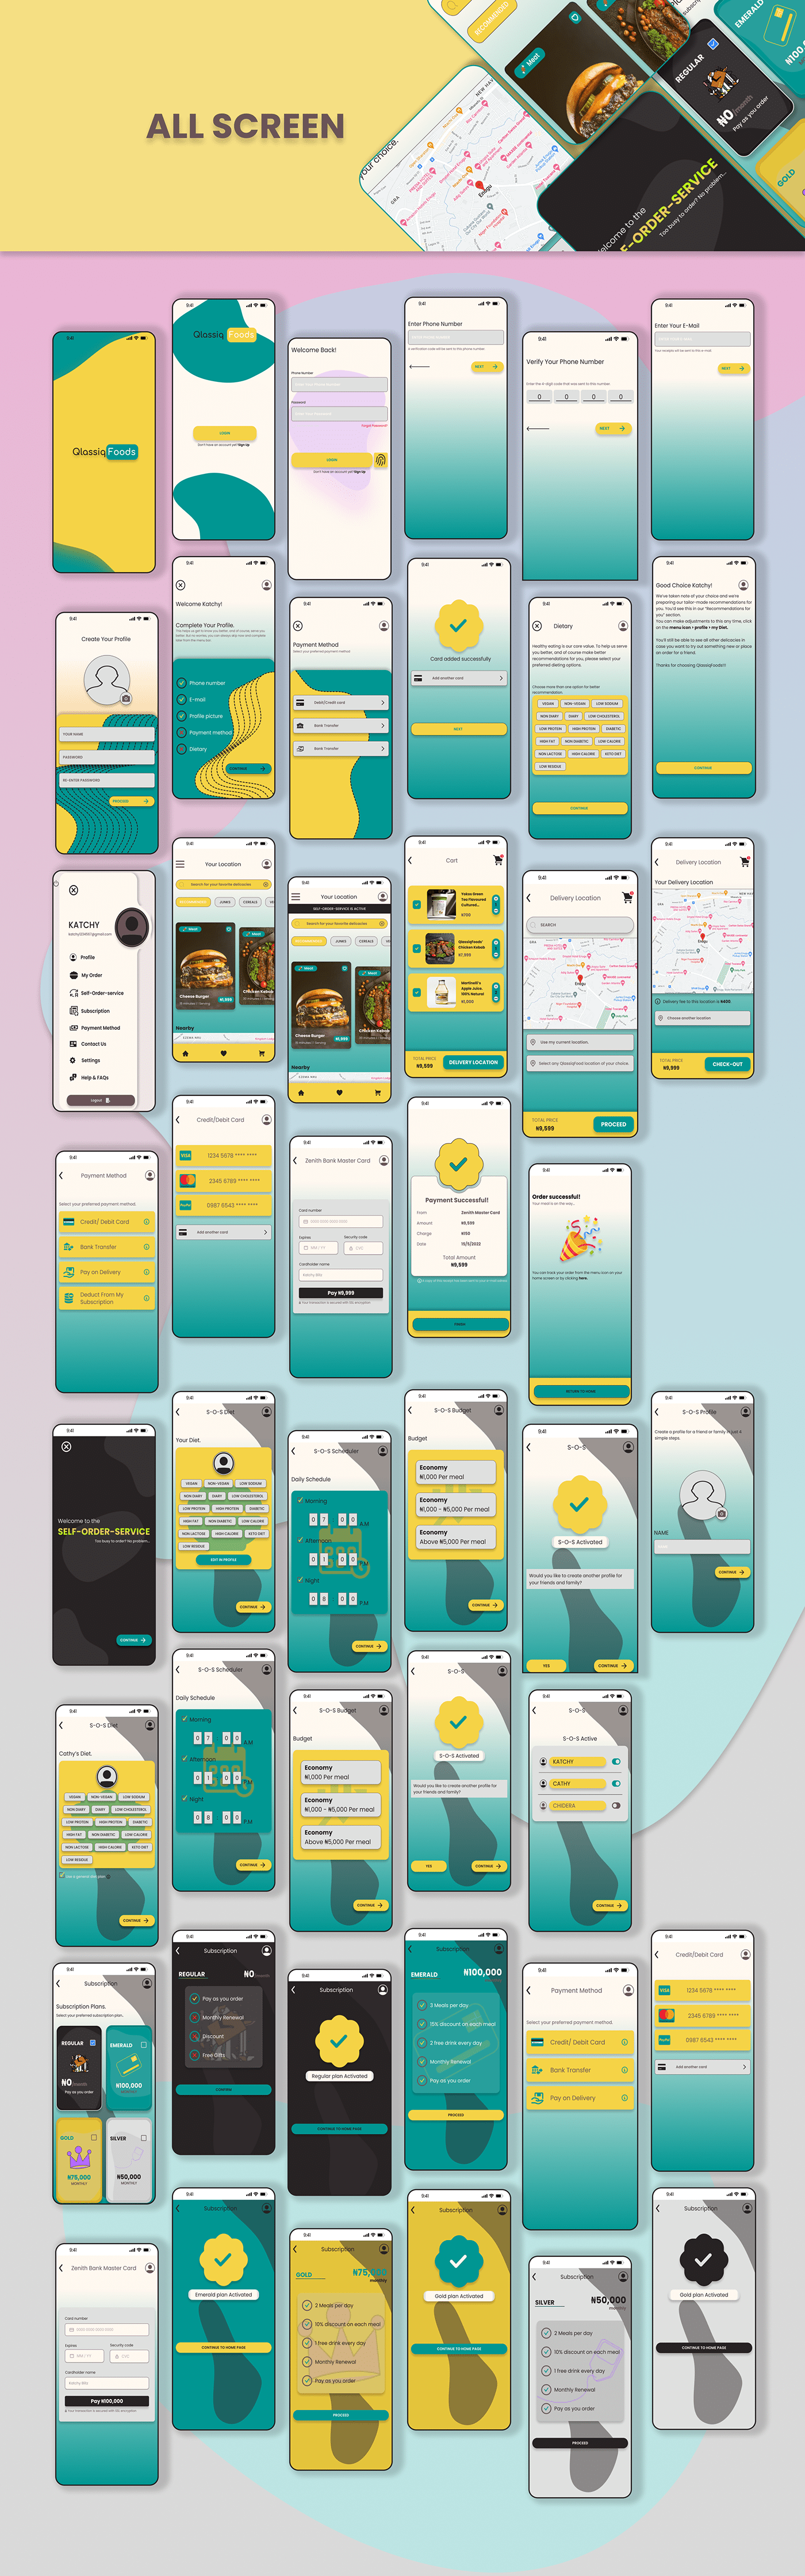 A food ordering app Delivers Meals Figma Food  Mobile app suggestions ui design UI/UX user interface ux